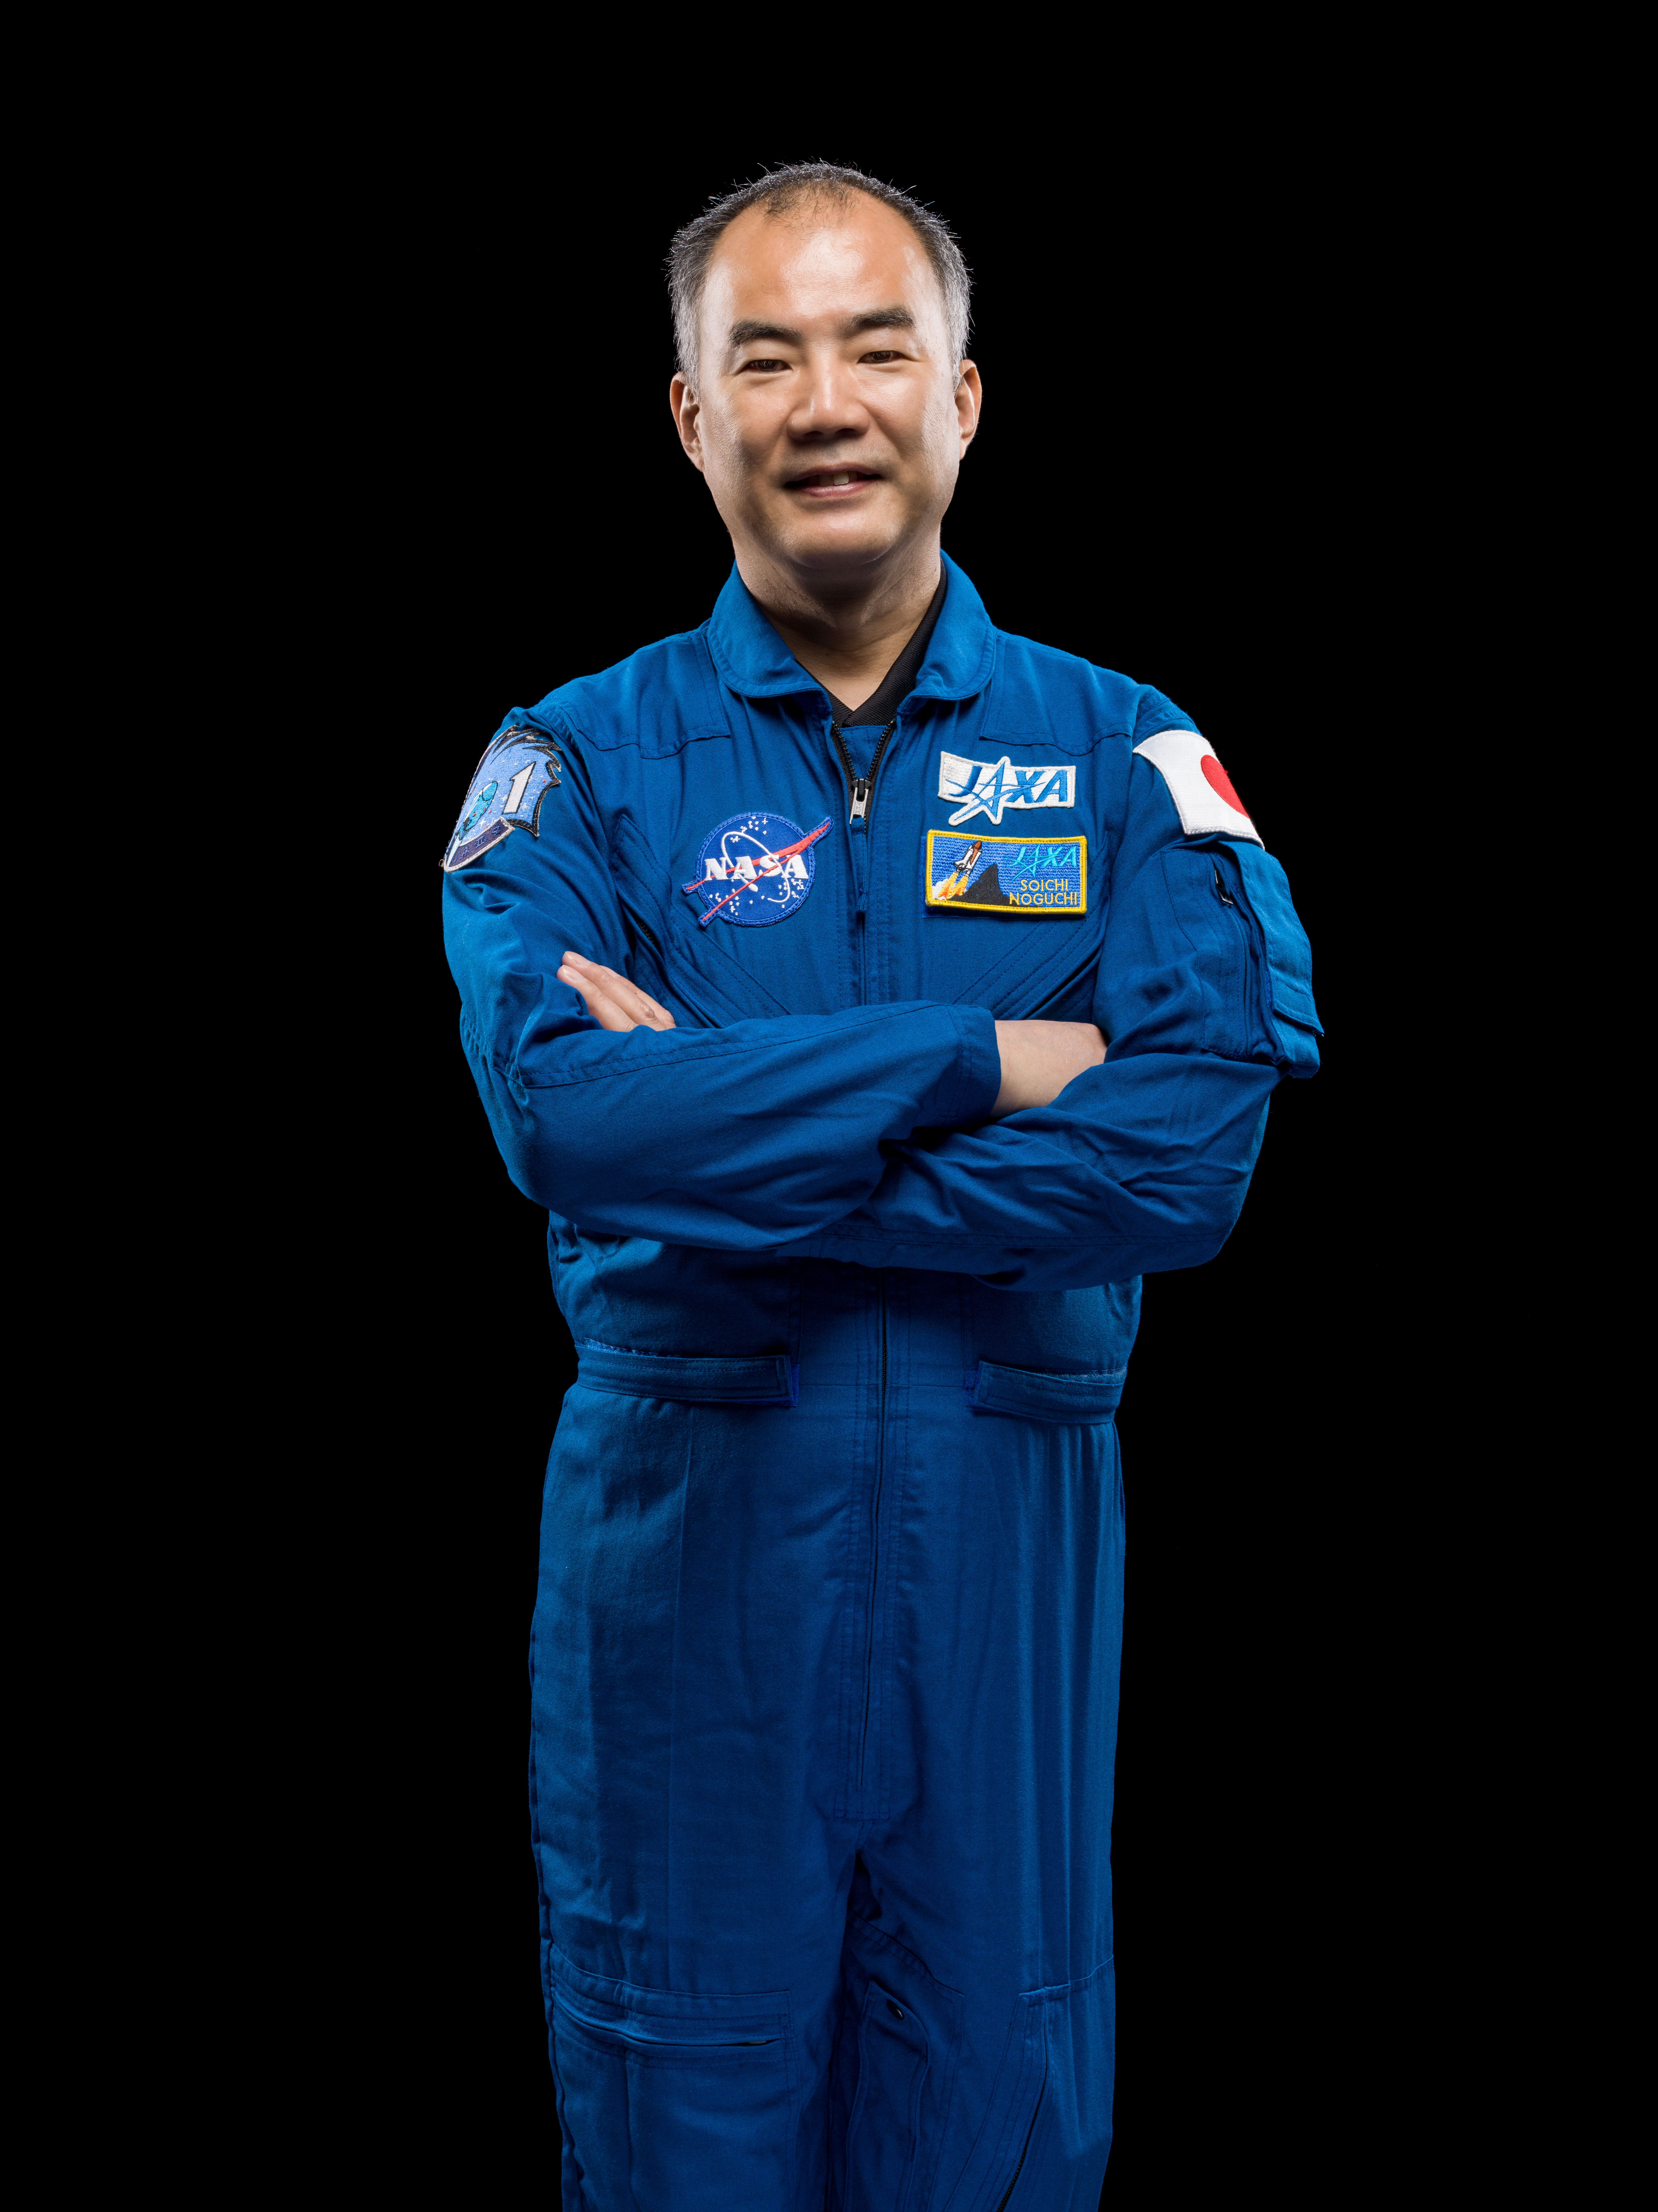 NASA's SpaceX Crew-1 Mission Specialist Soichi Noguchi is photographed in his blue Japan Aerospace Exploration Agency (JAXA) flight suit.